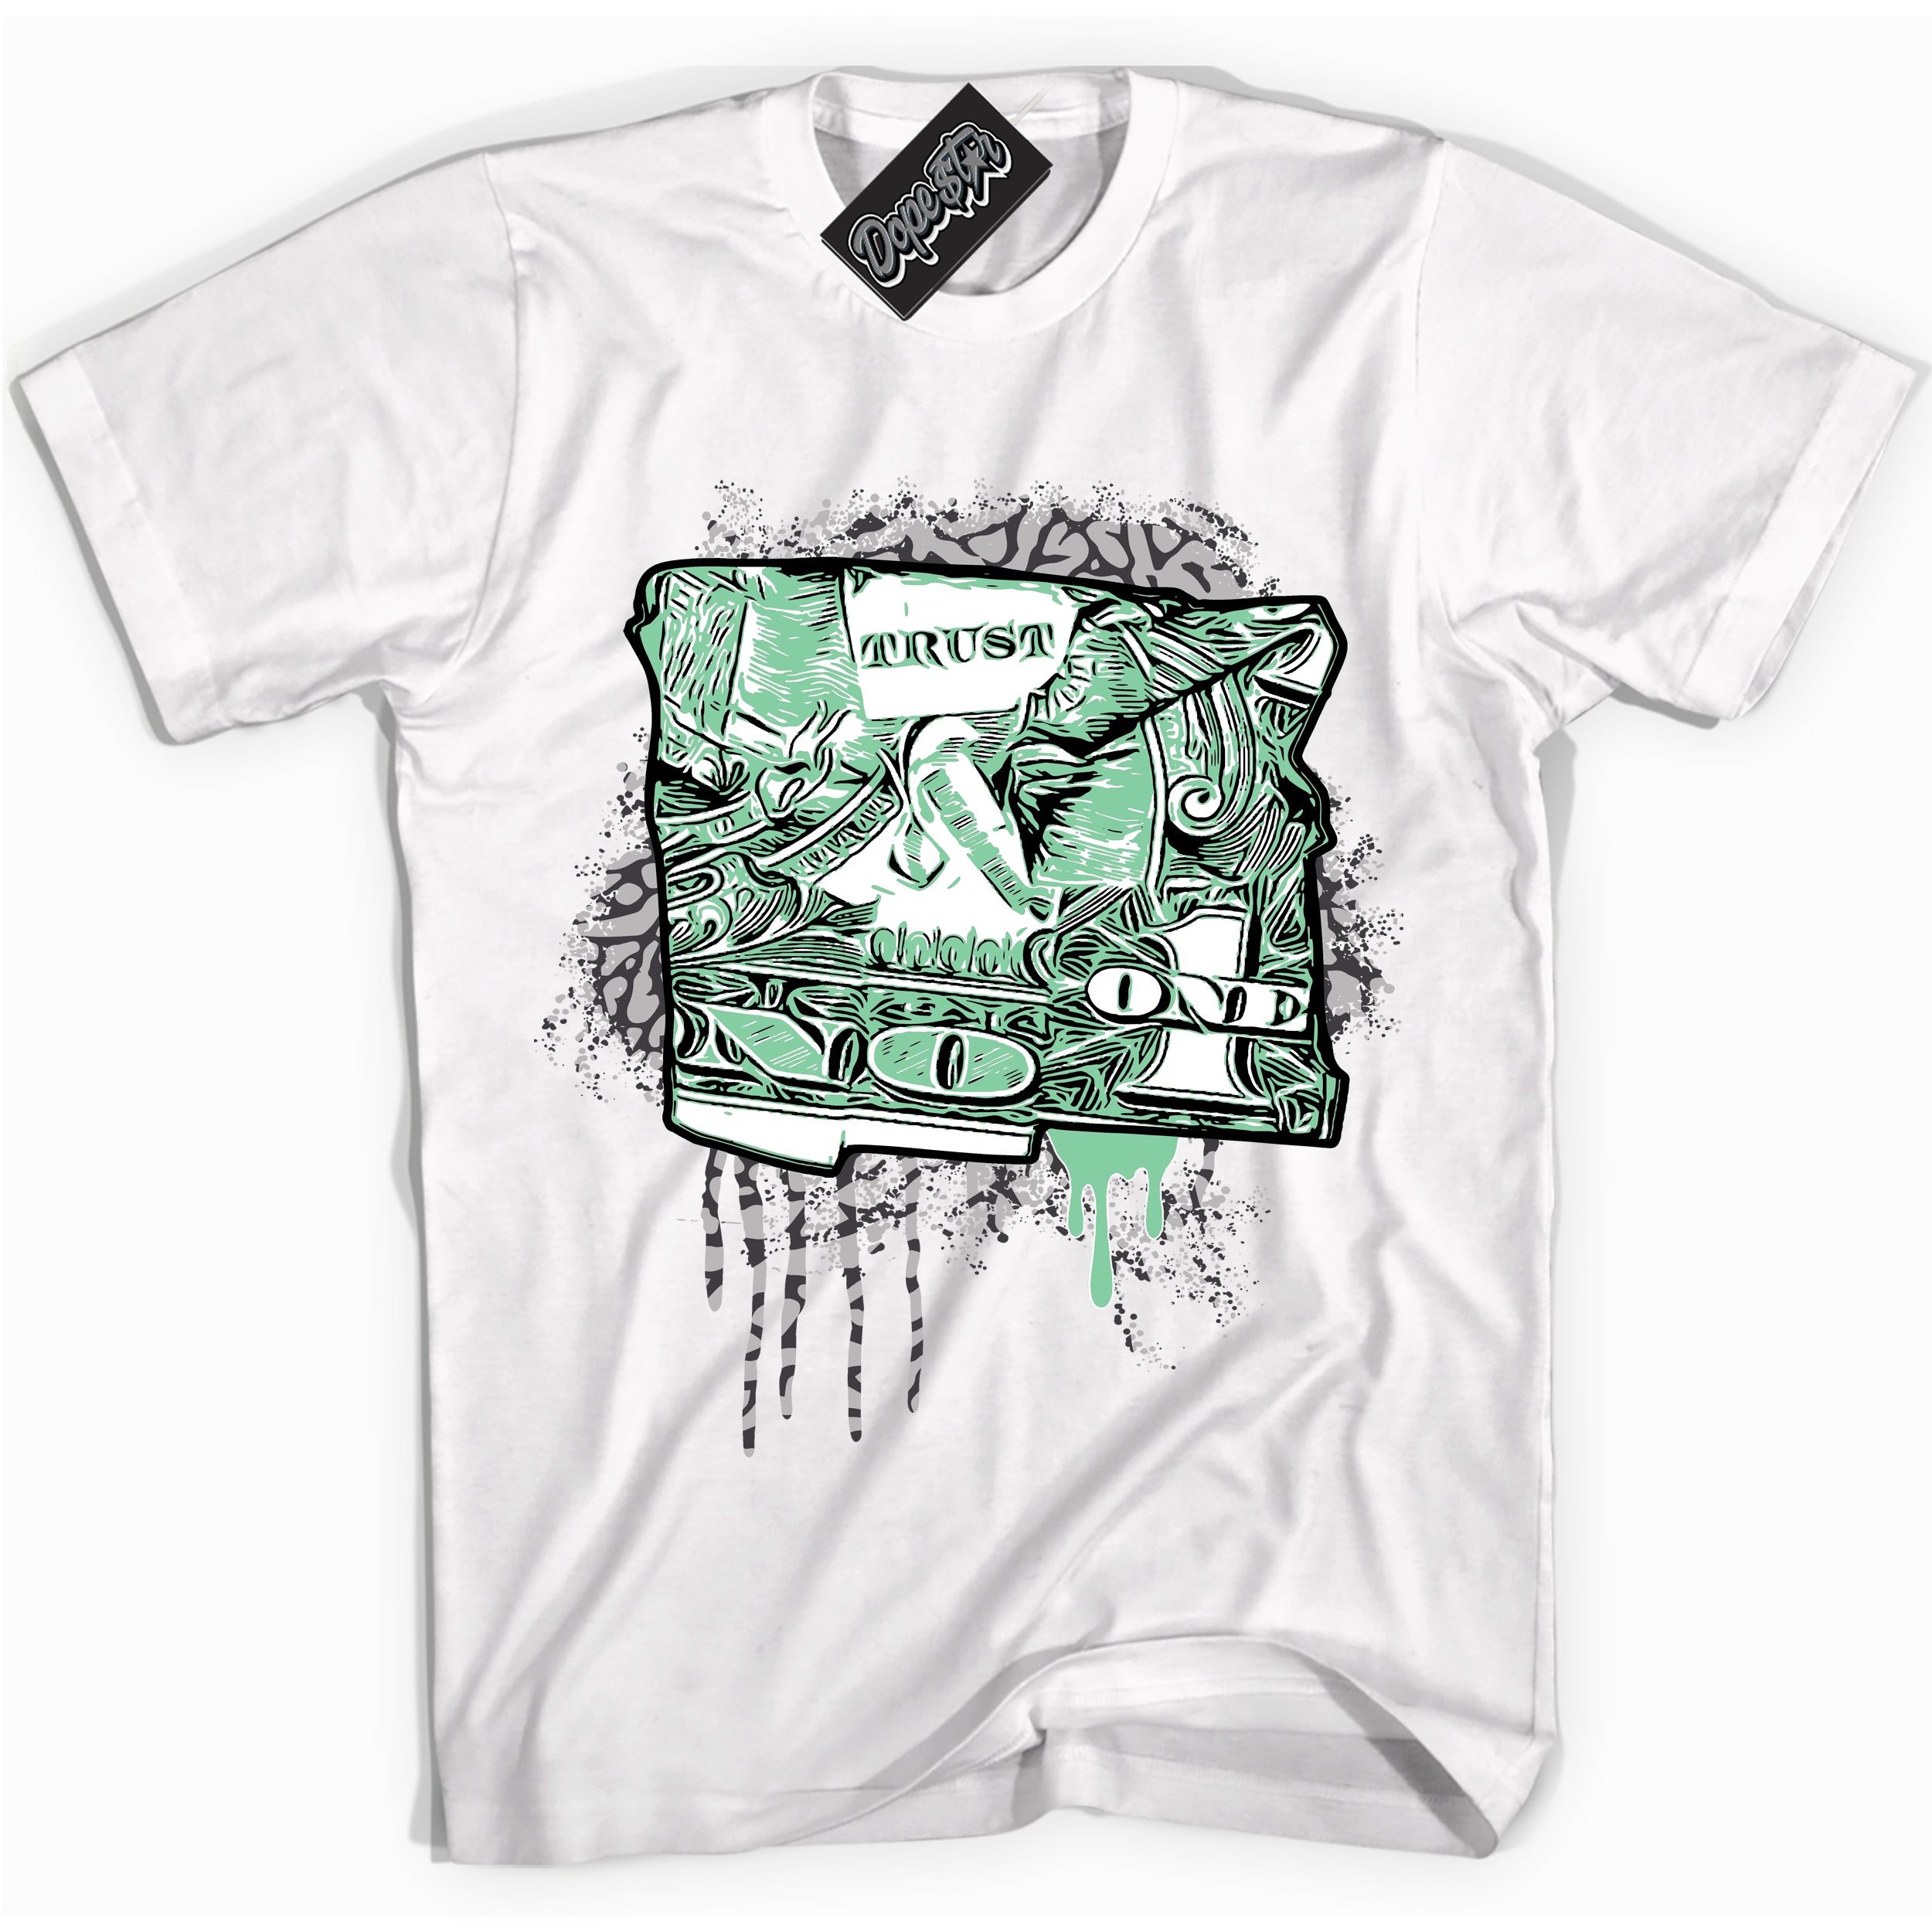 Cool White graphic tee with “ Trust No One Dollar ” design, that perfectly matches Green Glow 3s sneakers 